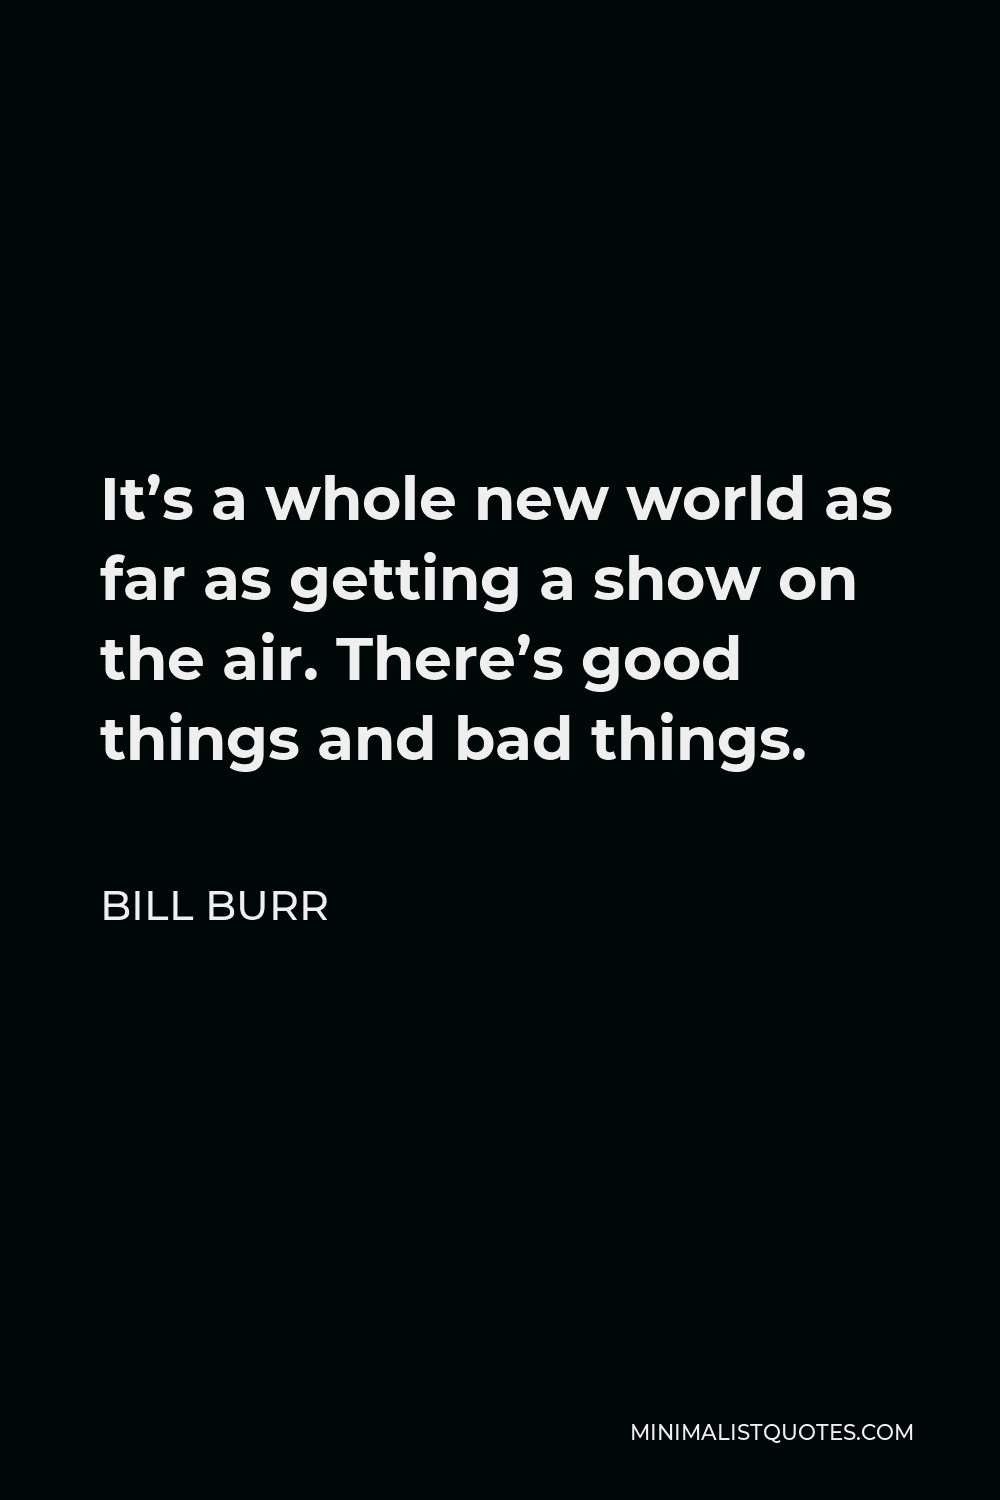 Bill Burr Quote - It’s a whole new world as far as getting a show on the air. There’s good things and bad things.